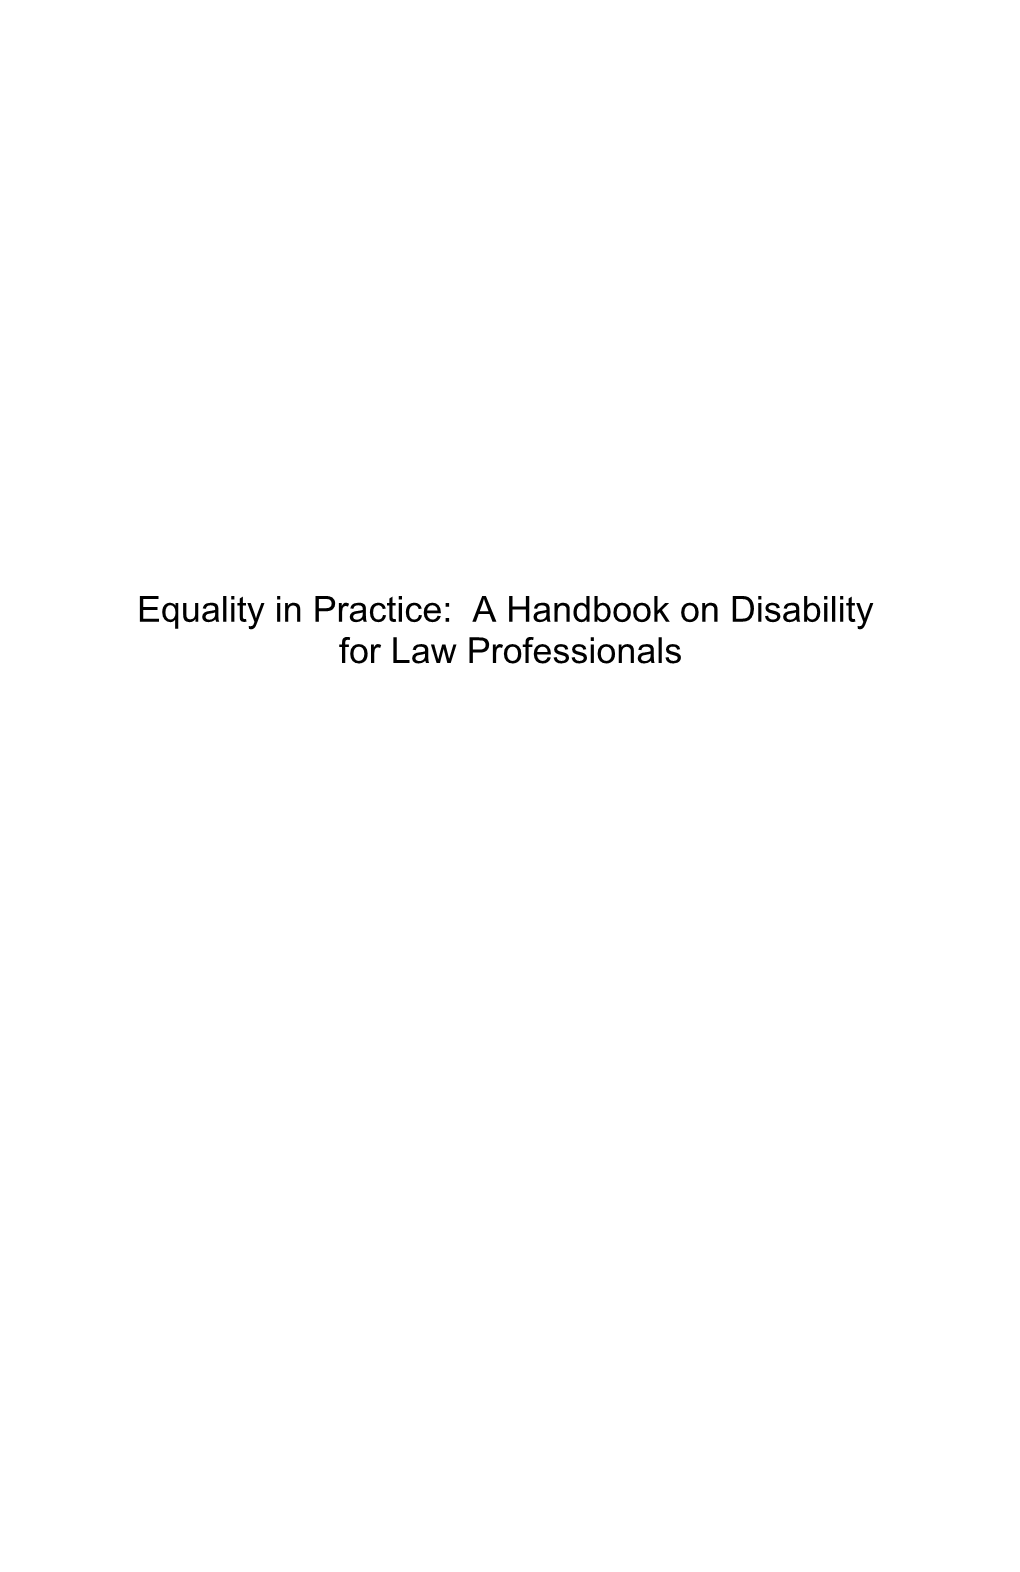 Equality in Practice: a Handbook on Disability